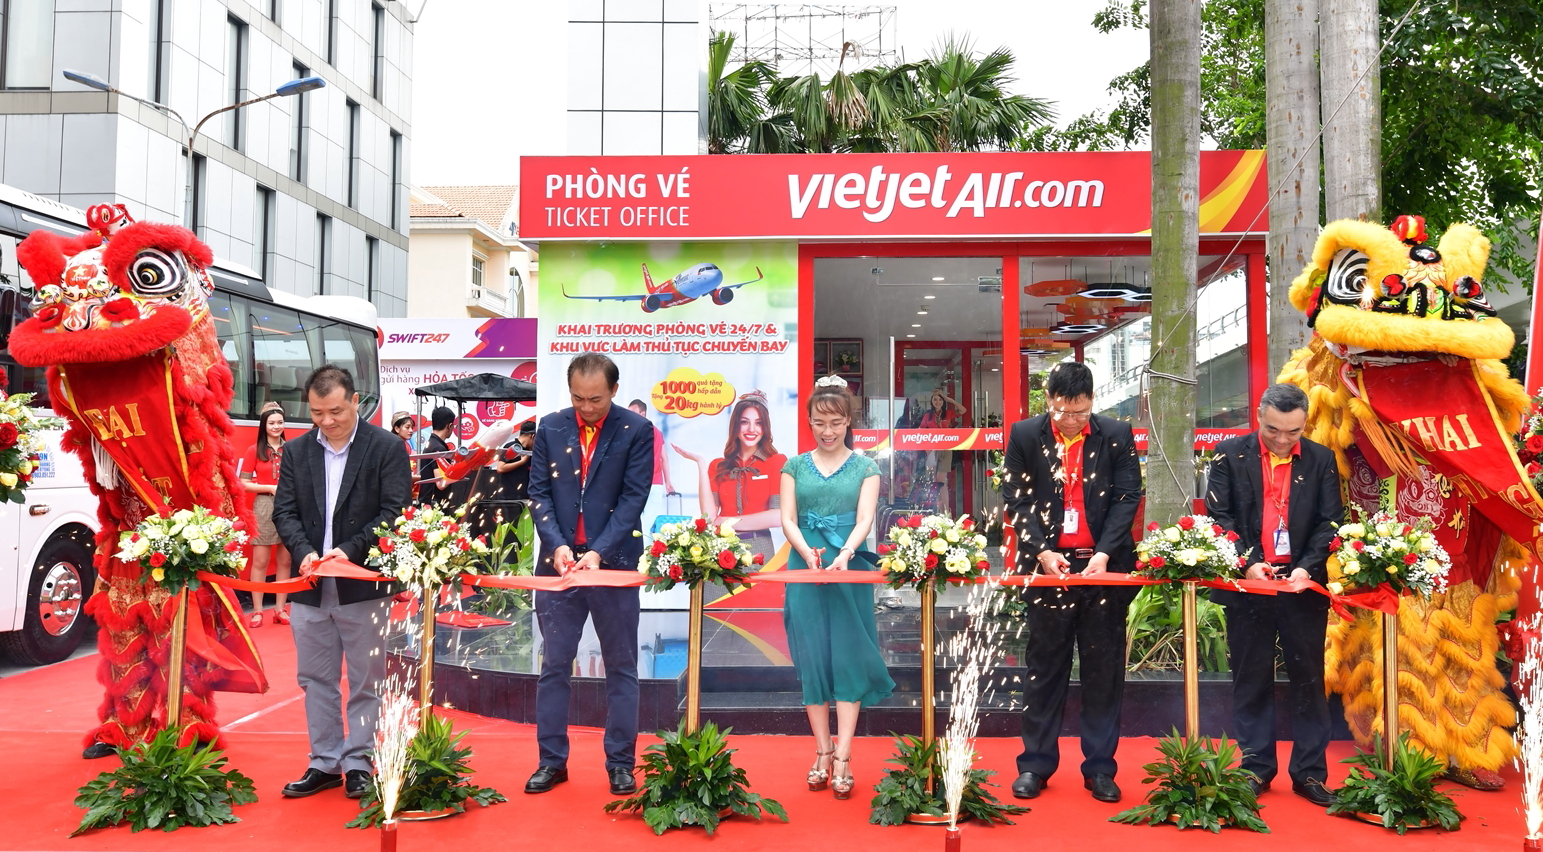 Vietjet leaders cut the ribbon to officially open the new ticket office in Ho Chi Minh (Saigon). Click to enlarge.